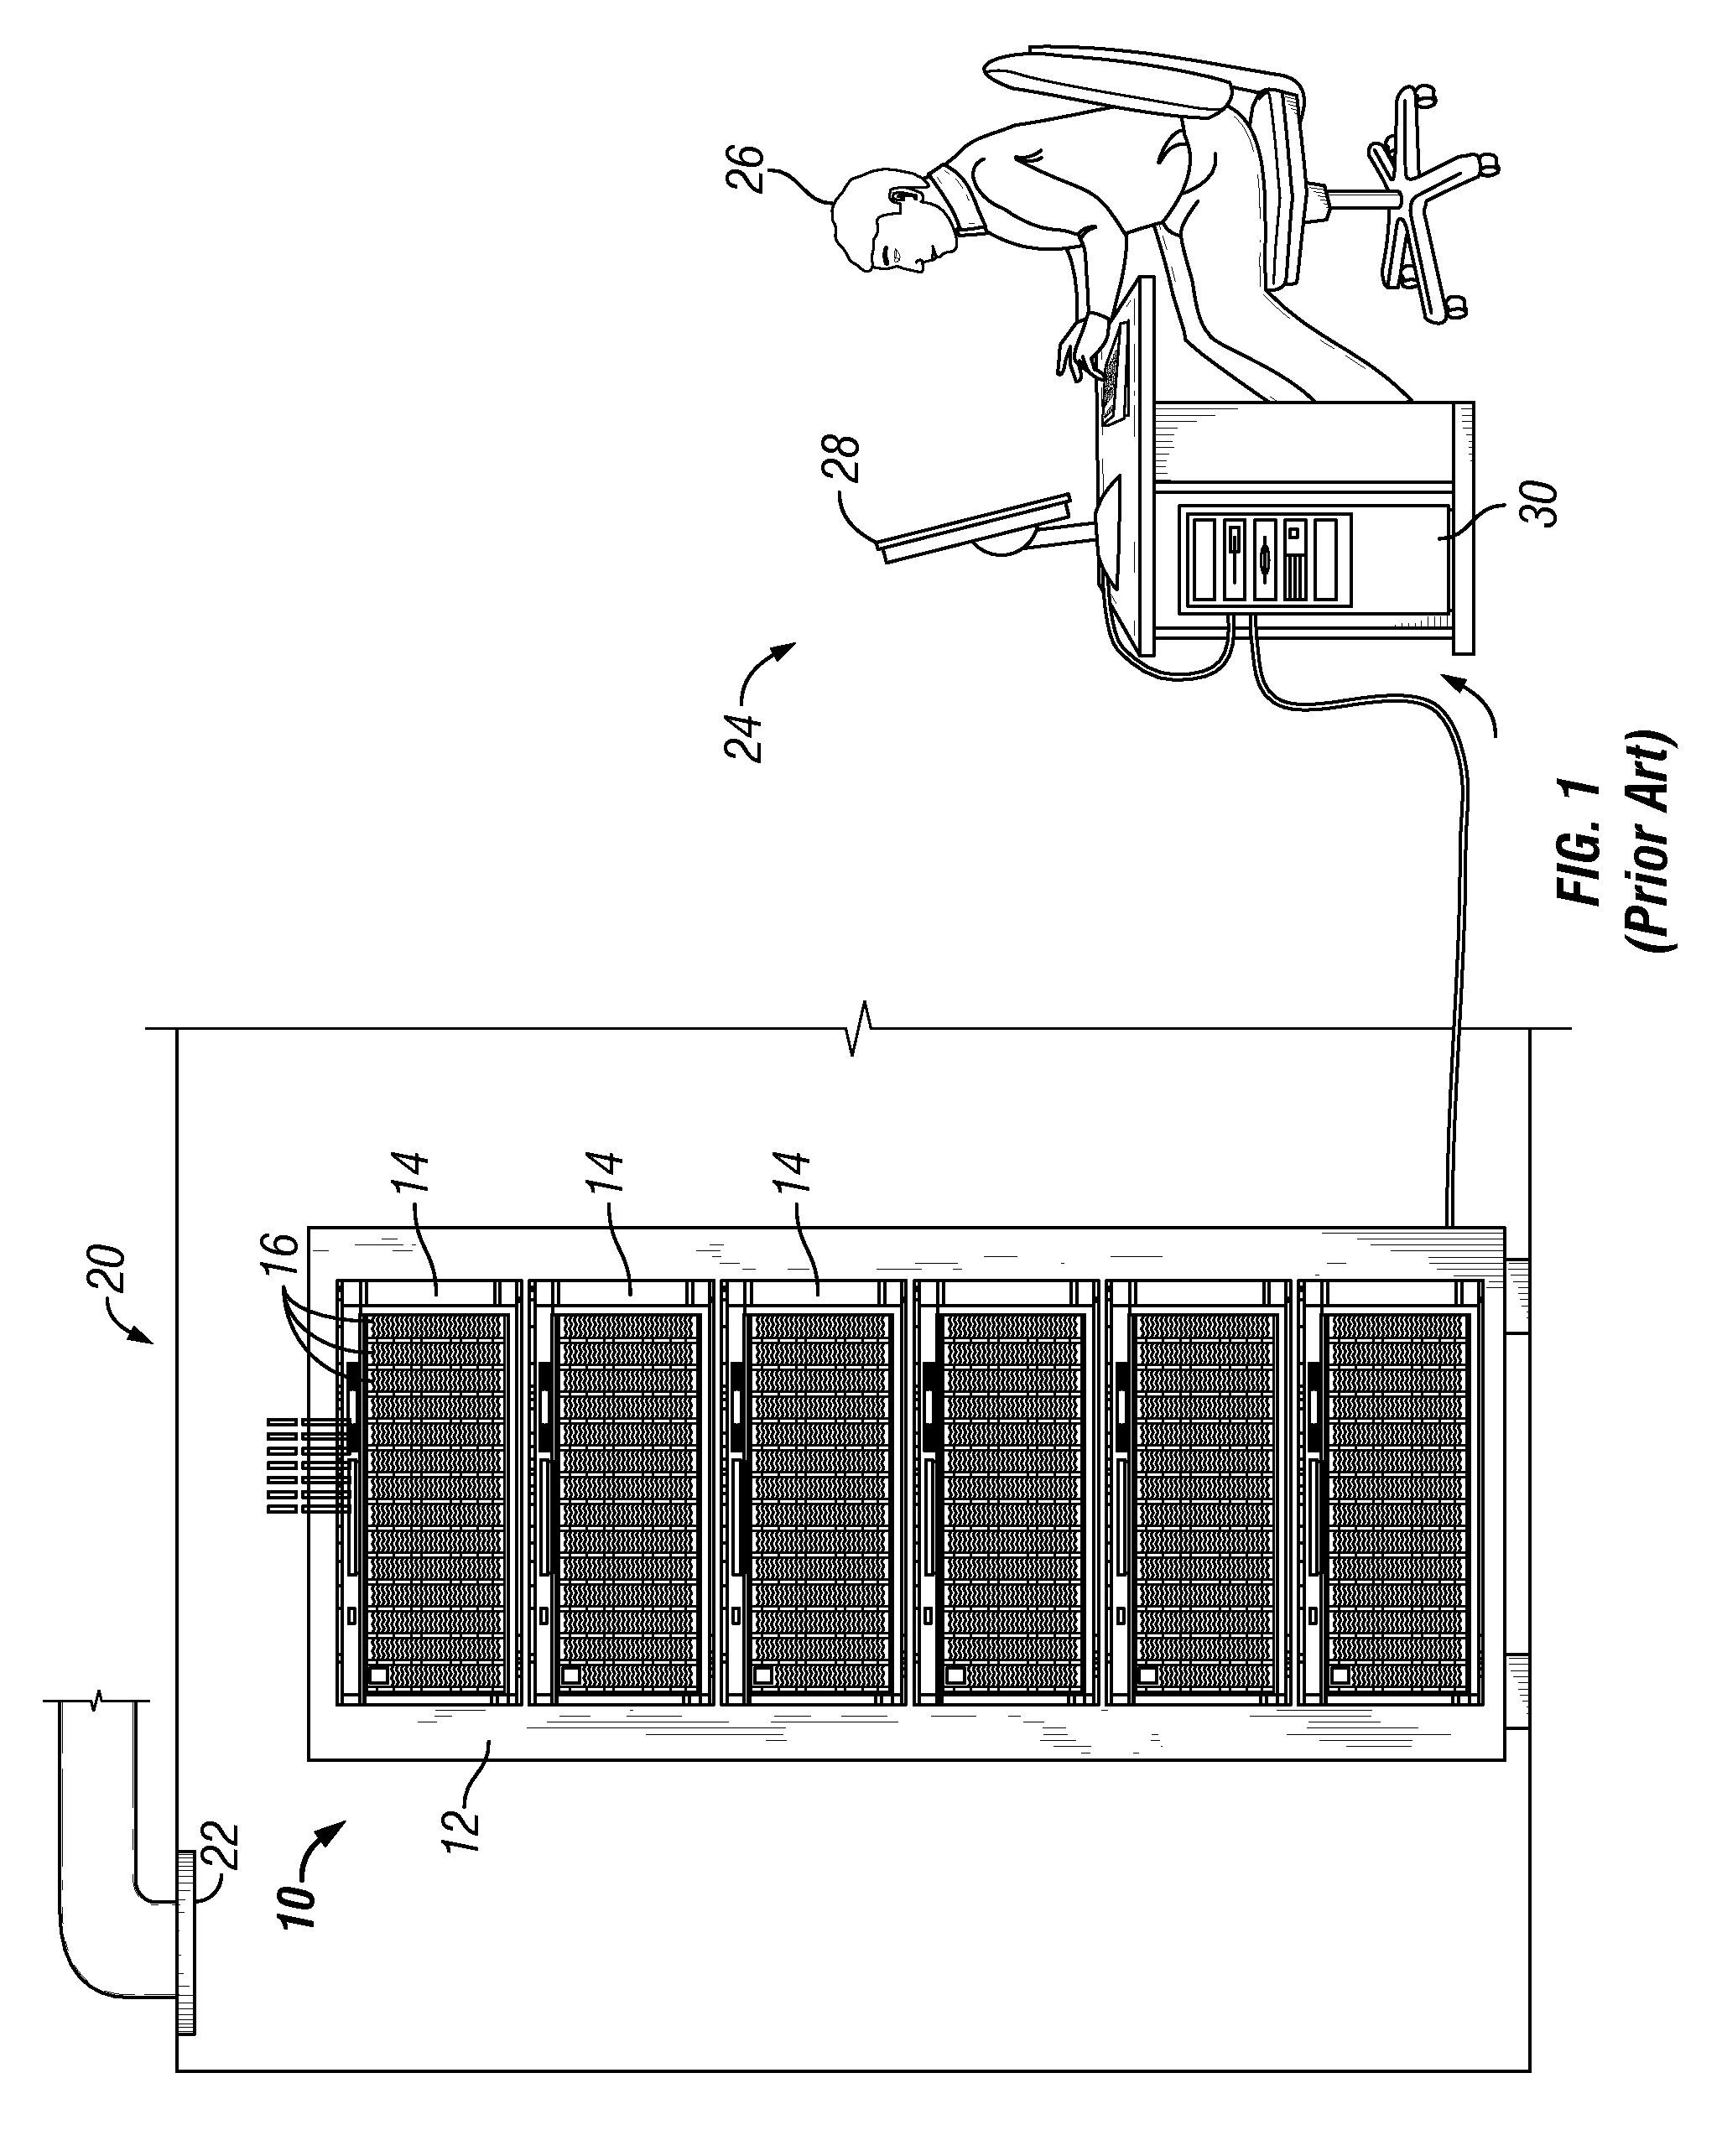 Air-pressure-dependent control of cooling systems using a shared air pressure sensor